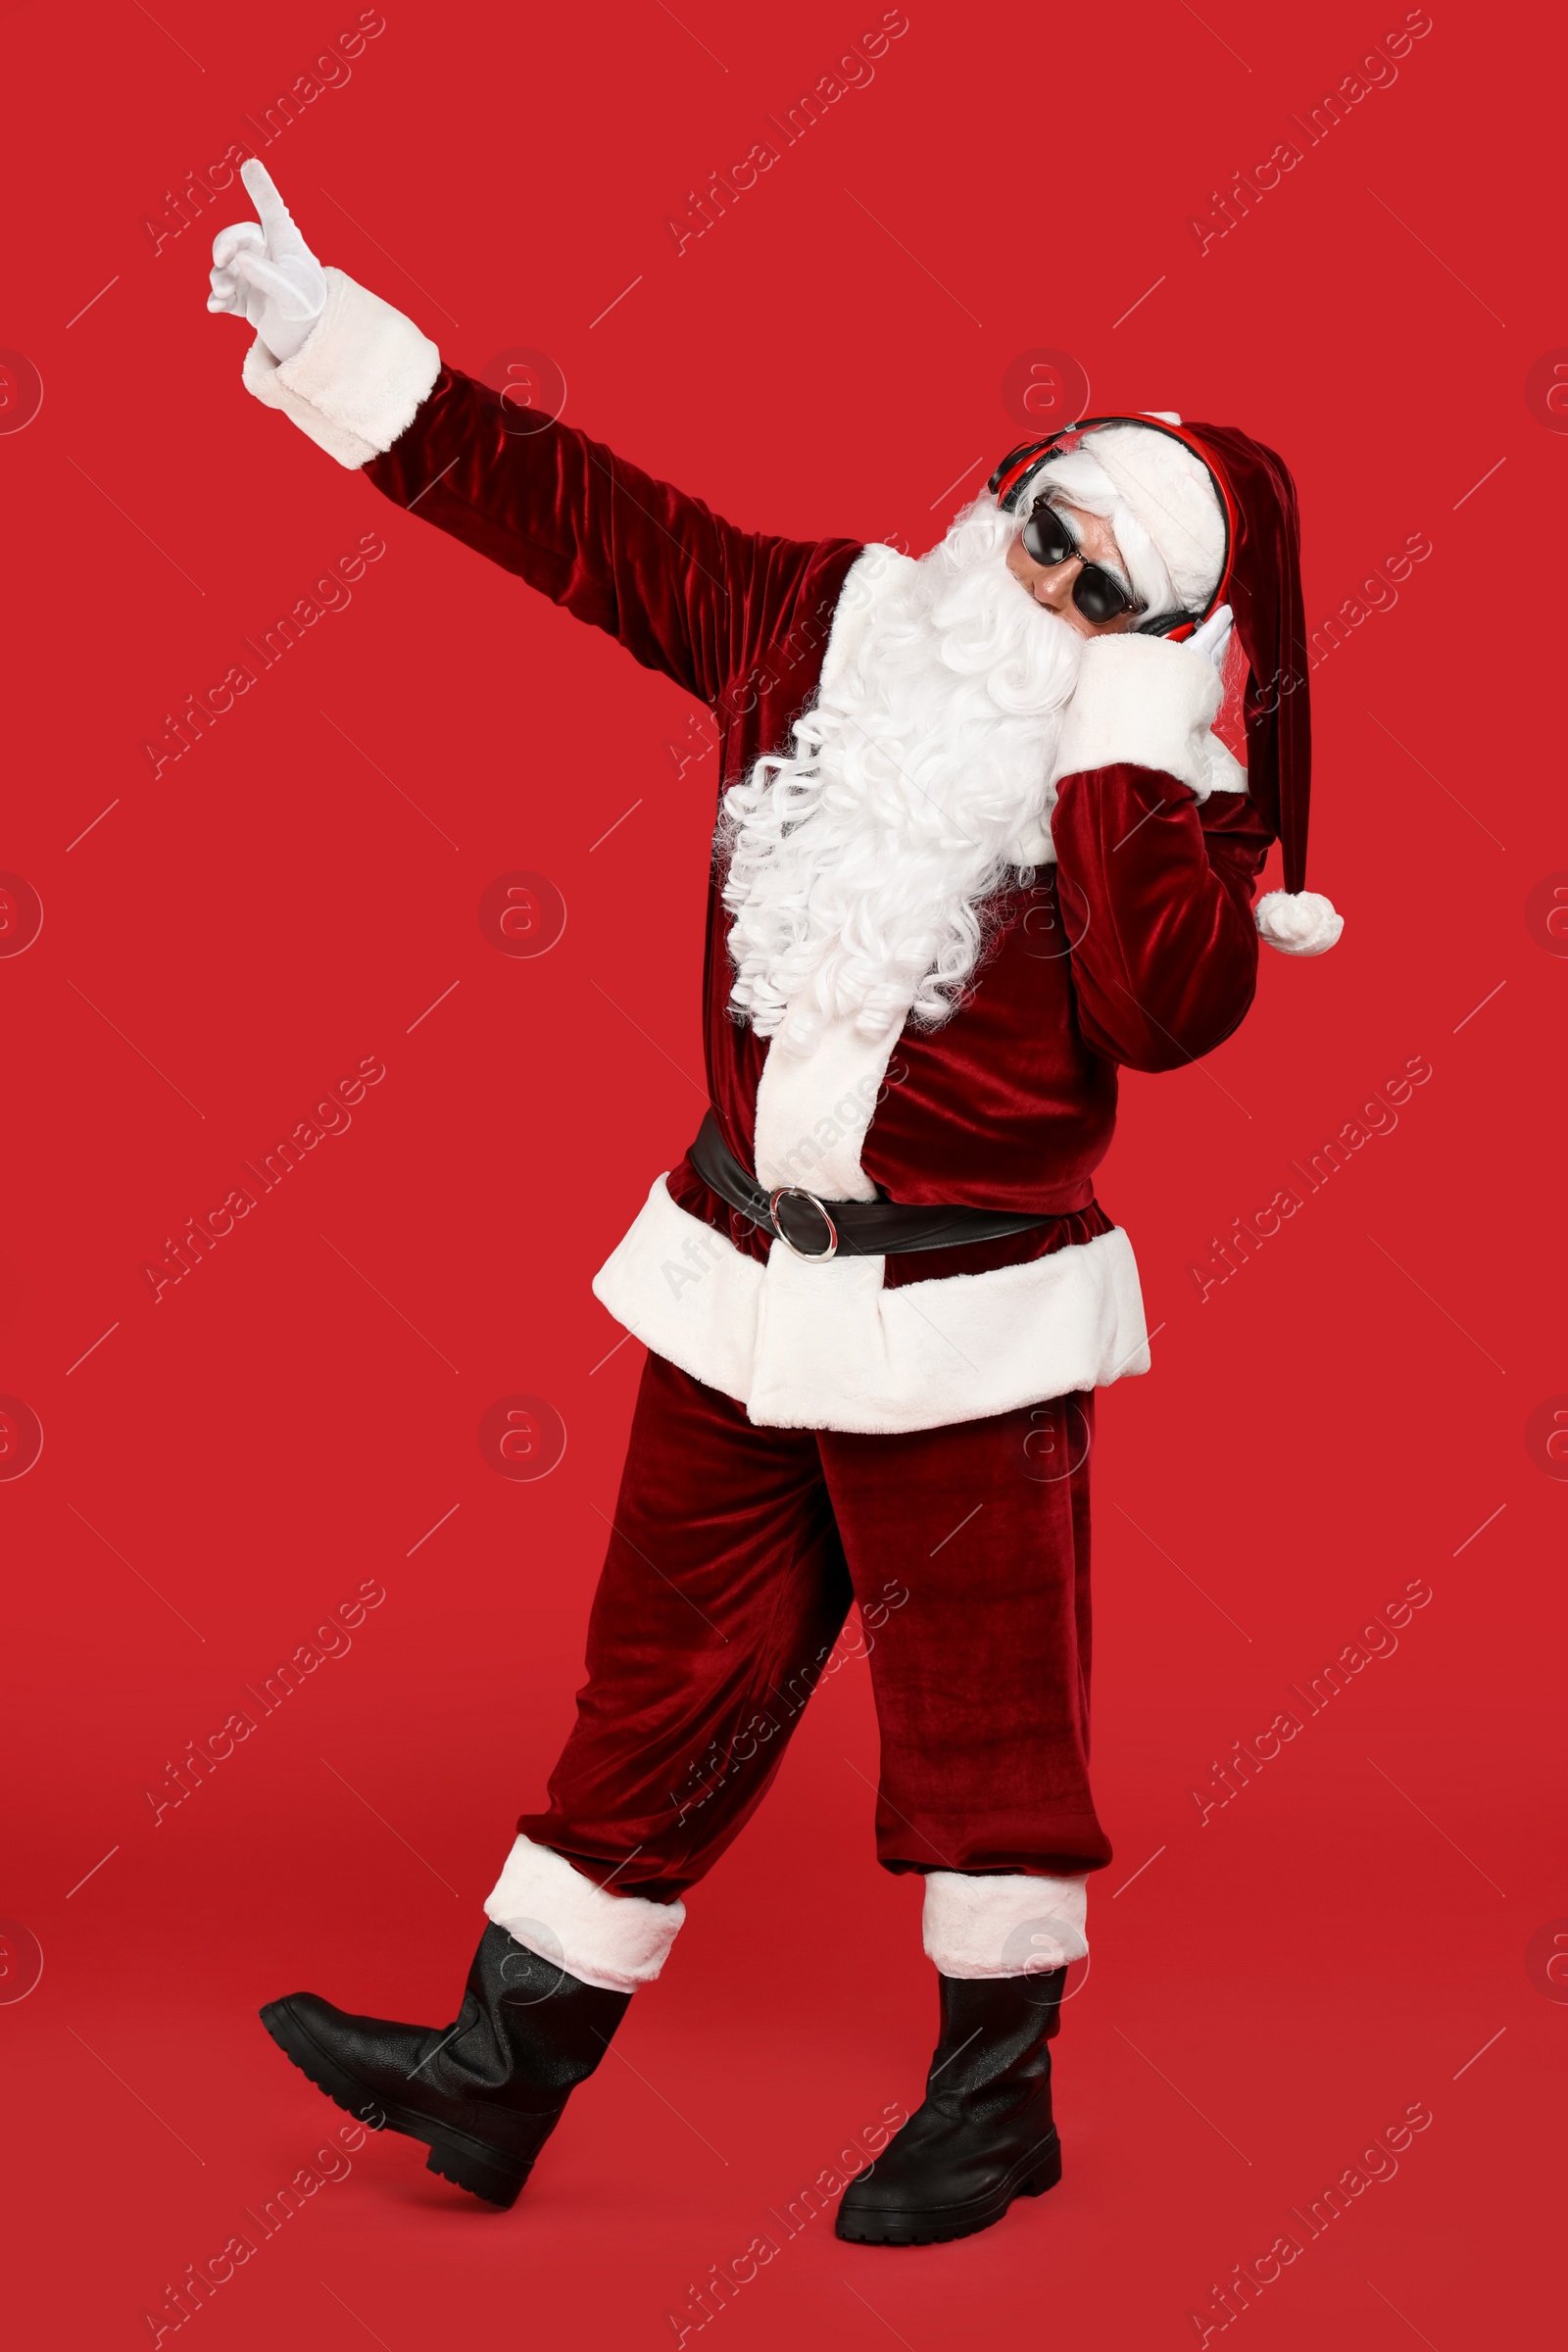 Photo of Santa Claus with headphones listening to Christmas music on red background